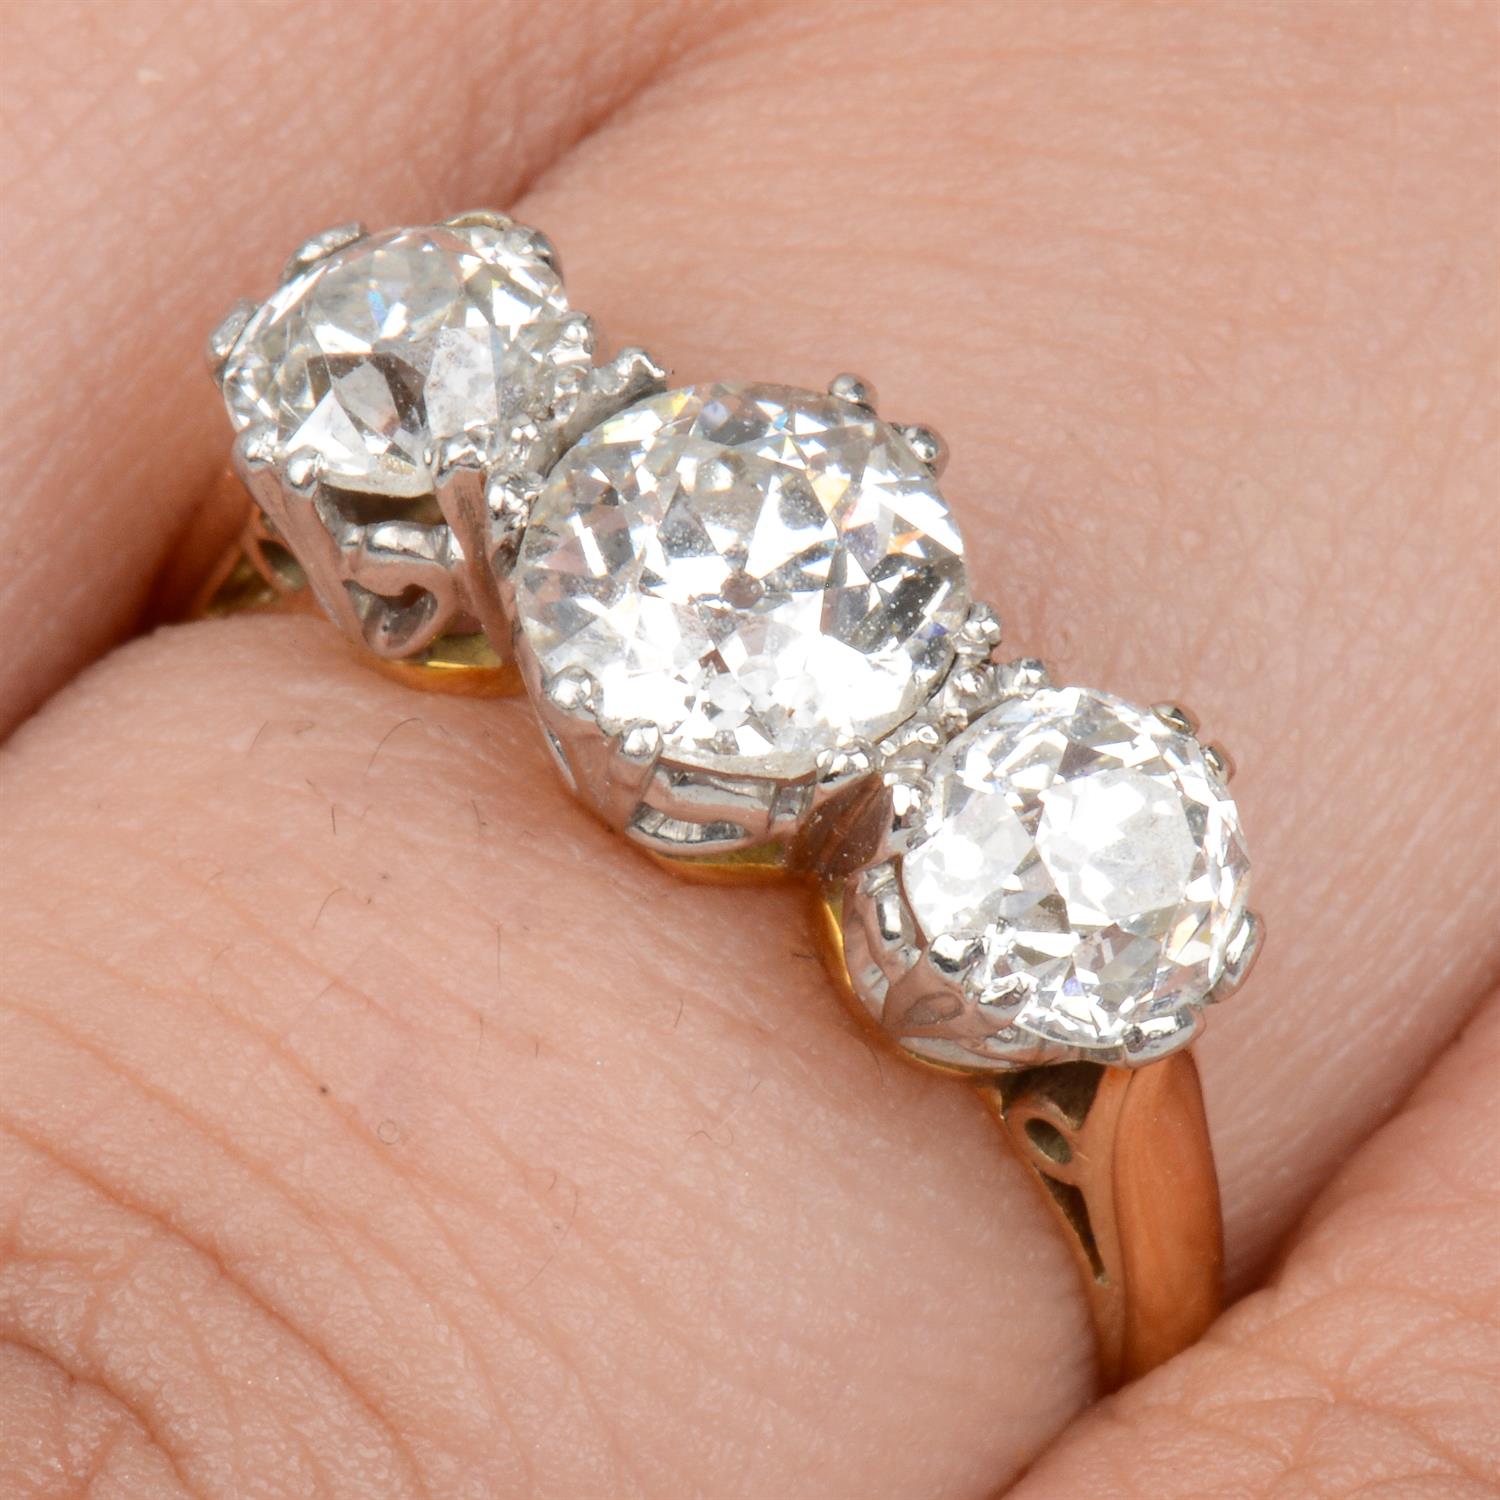 Early 20th century platinum and 18ct gold diamond ring